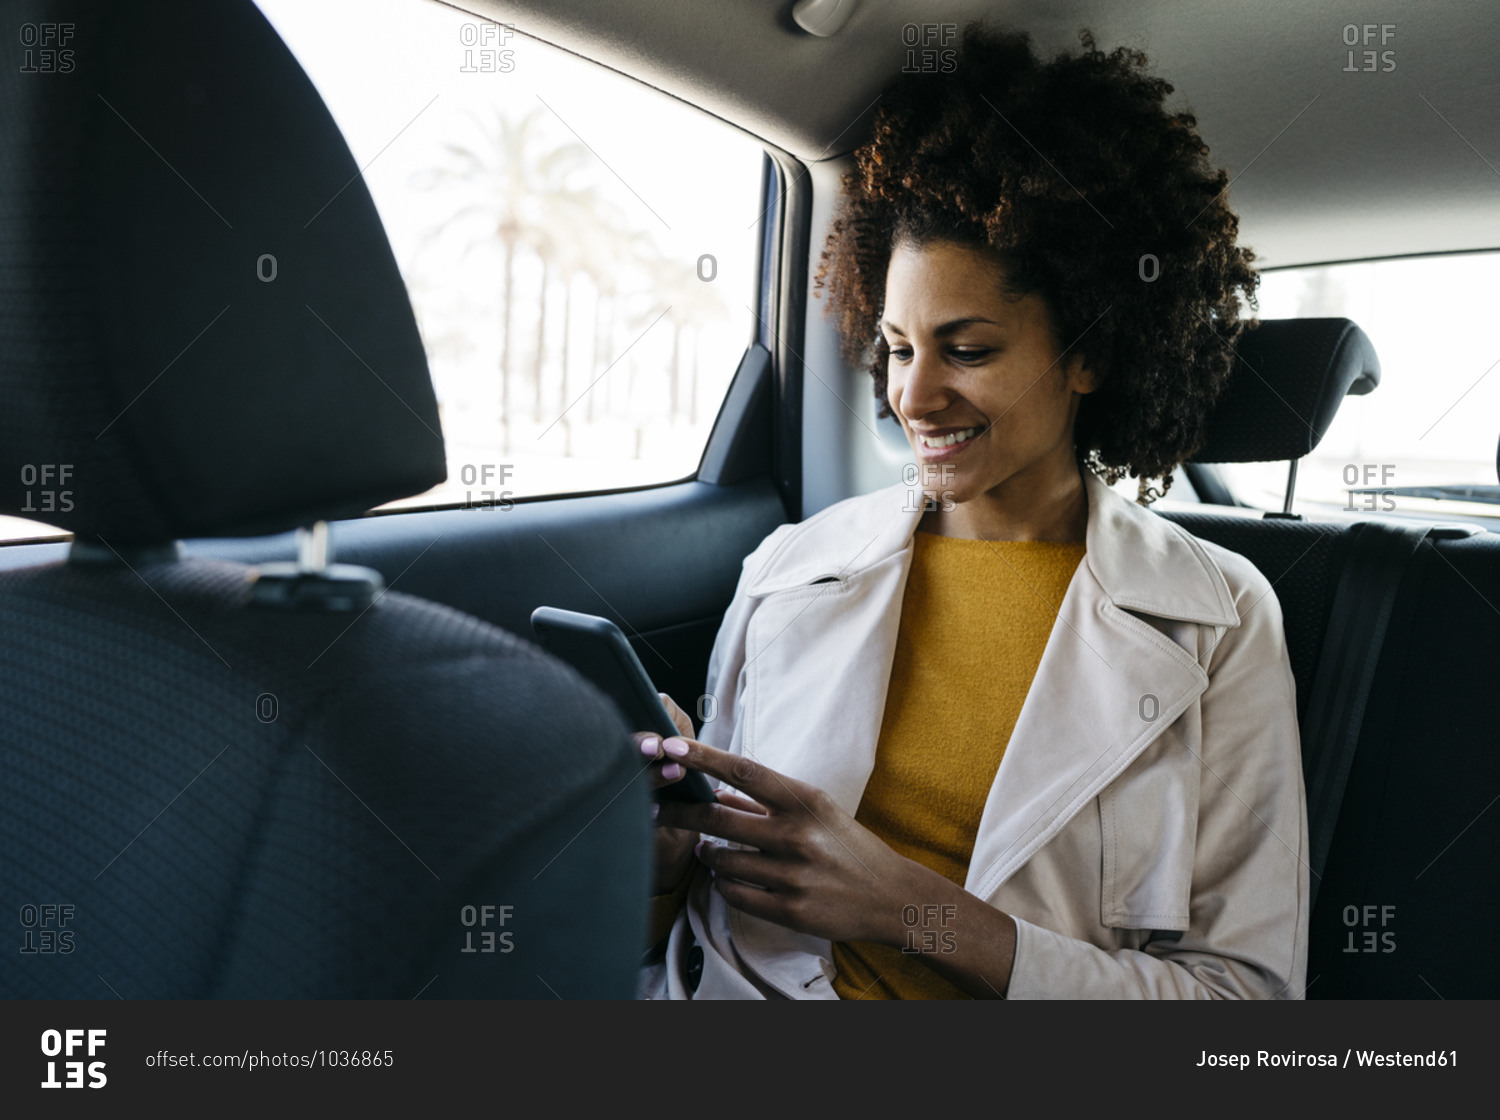 Smiling woman sitting in back seat of a car using cell phone